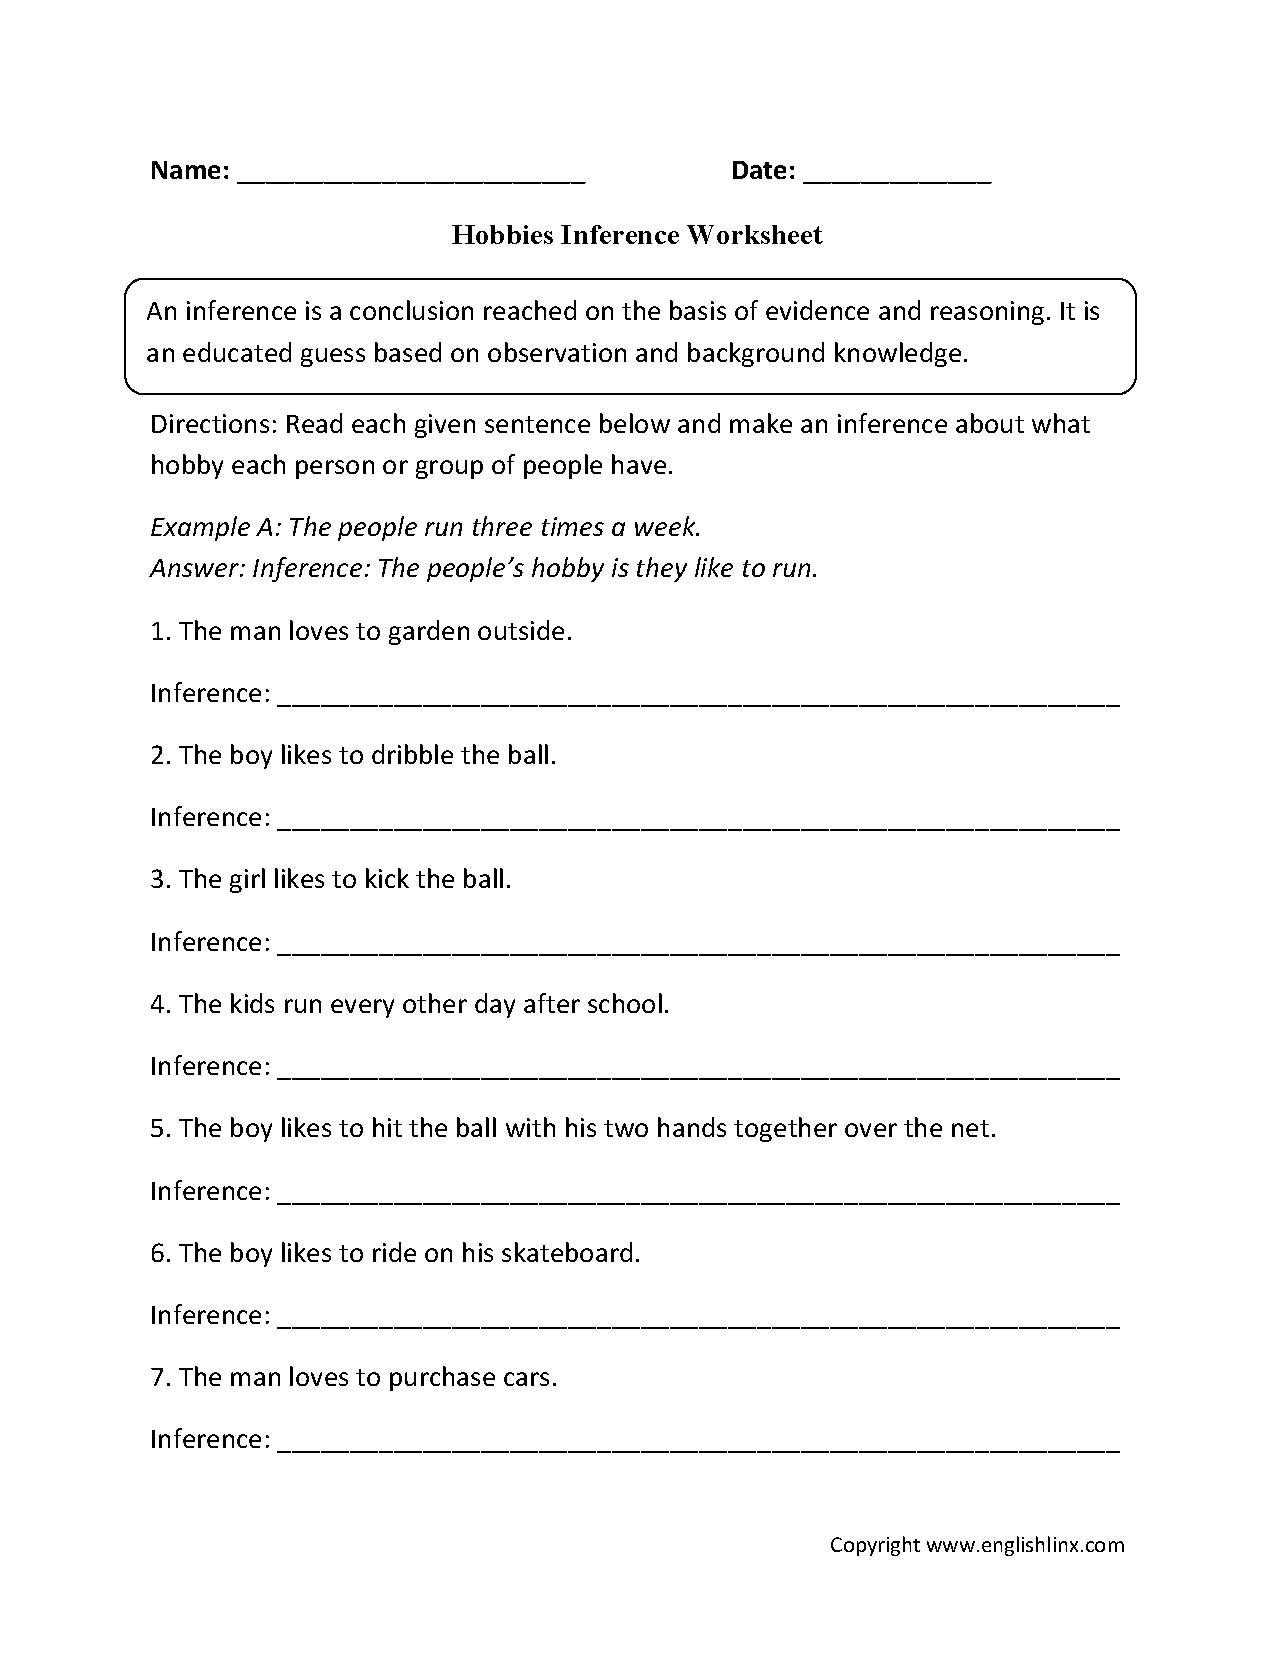 Hobbies Inference Worksheets